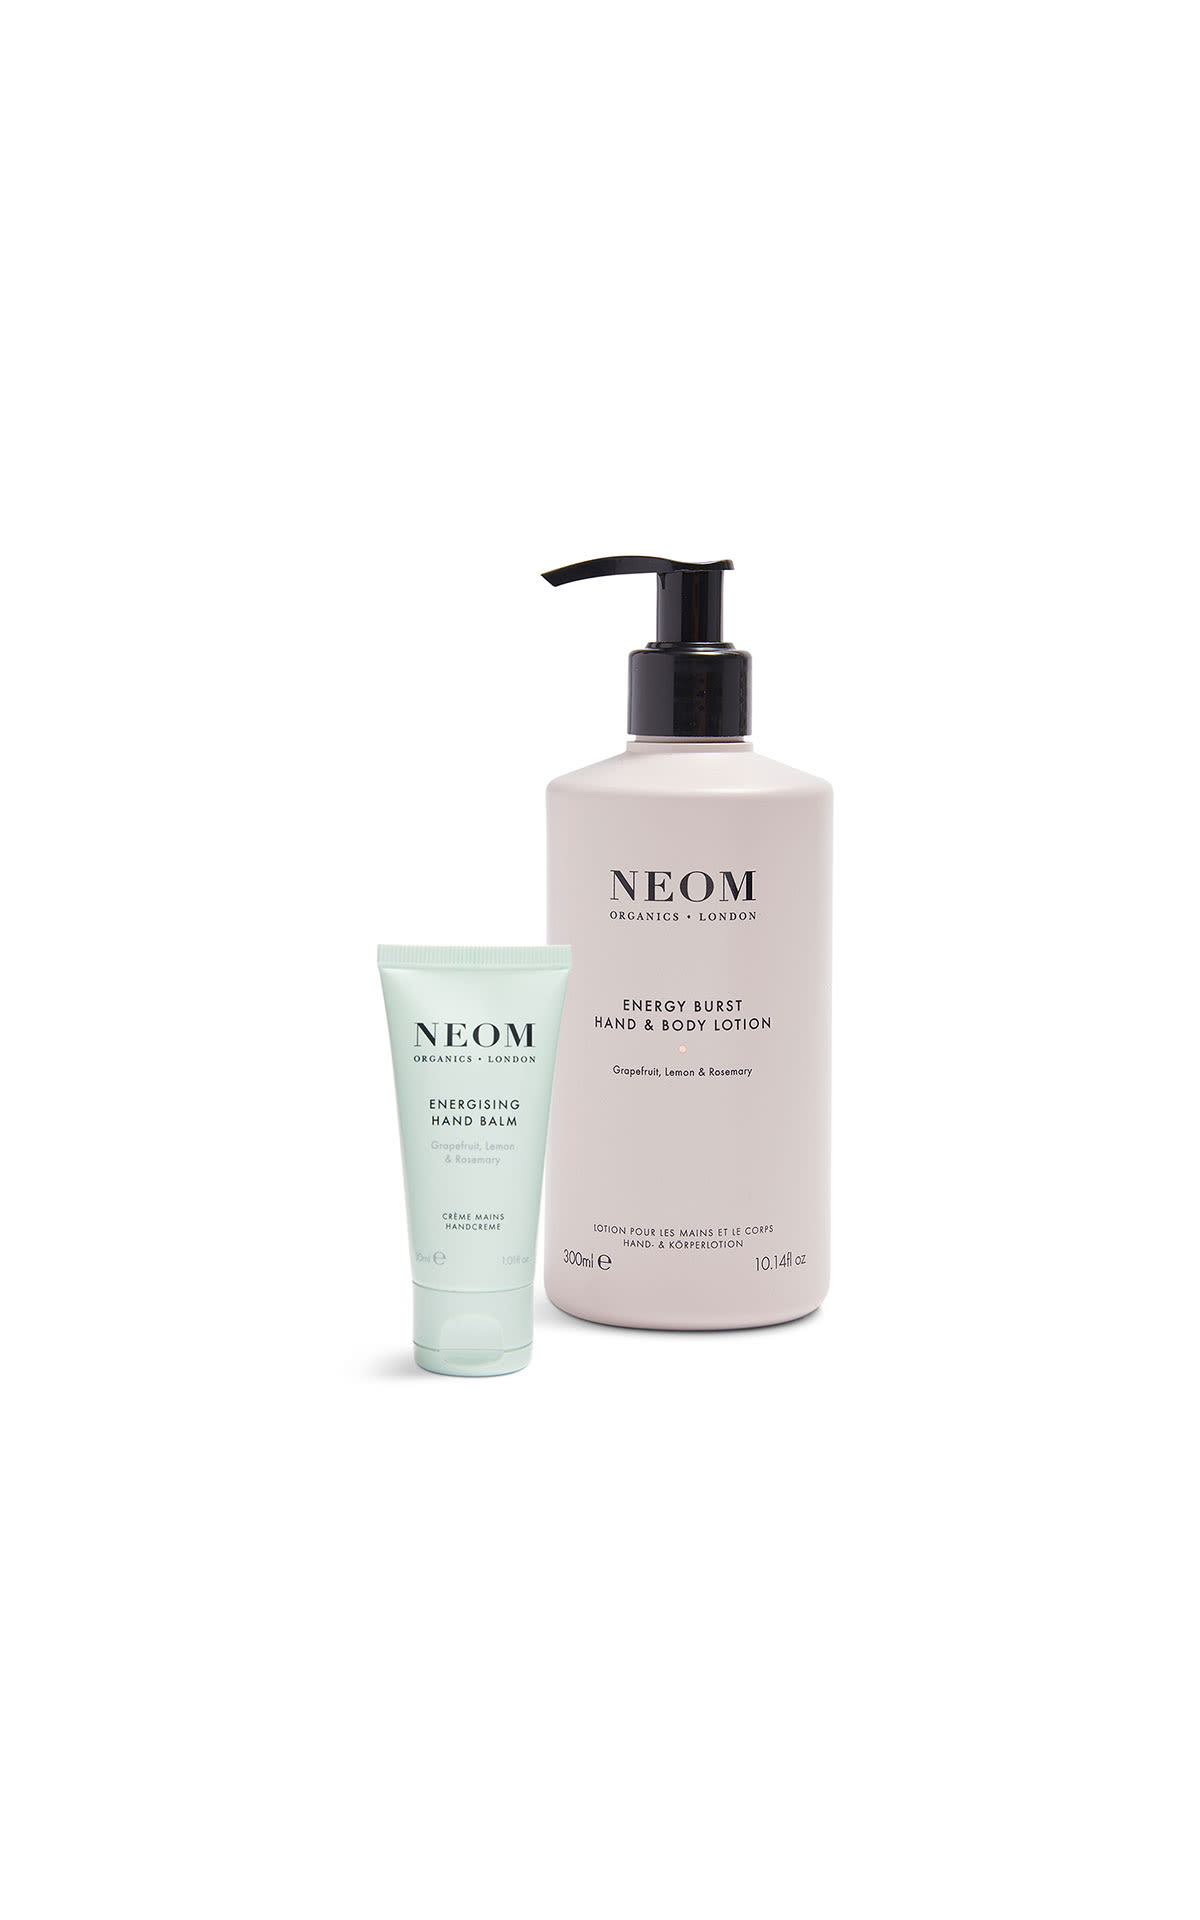 NEOM Energy lotion and energising hand balm from Bicester Village